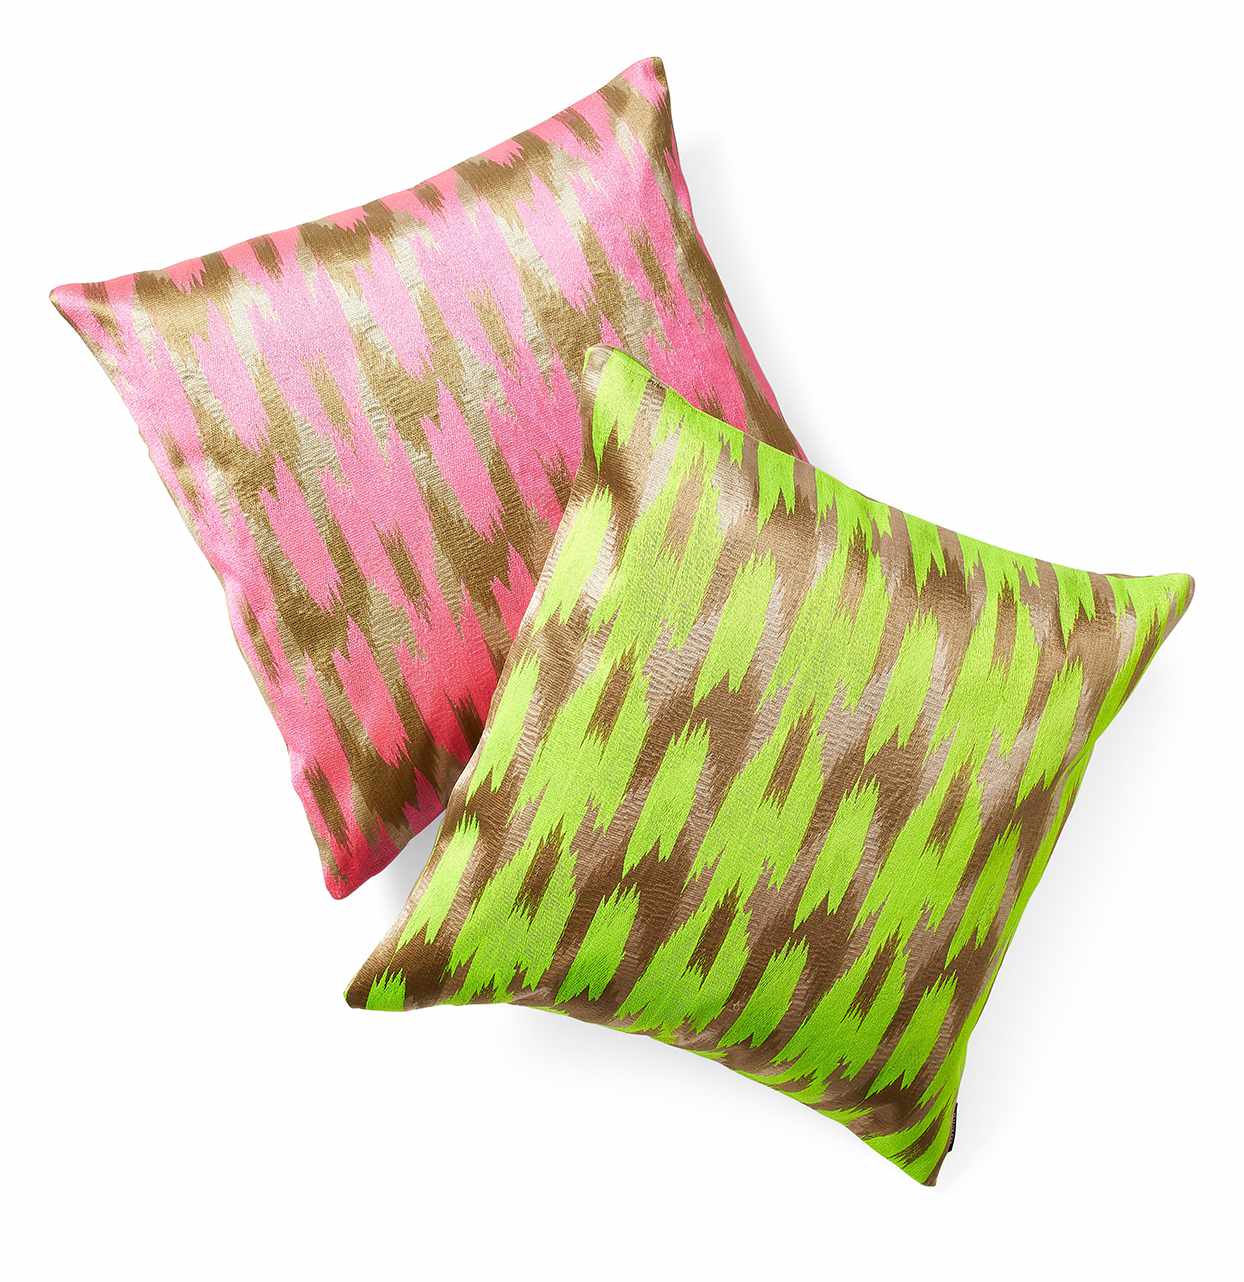 pink, green and gold patterned pillows